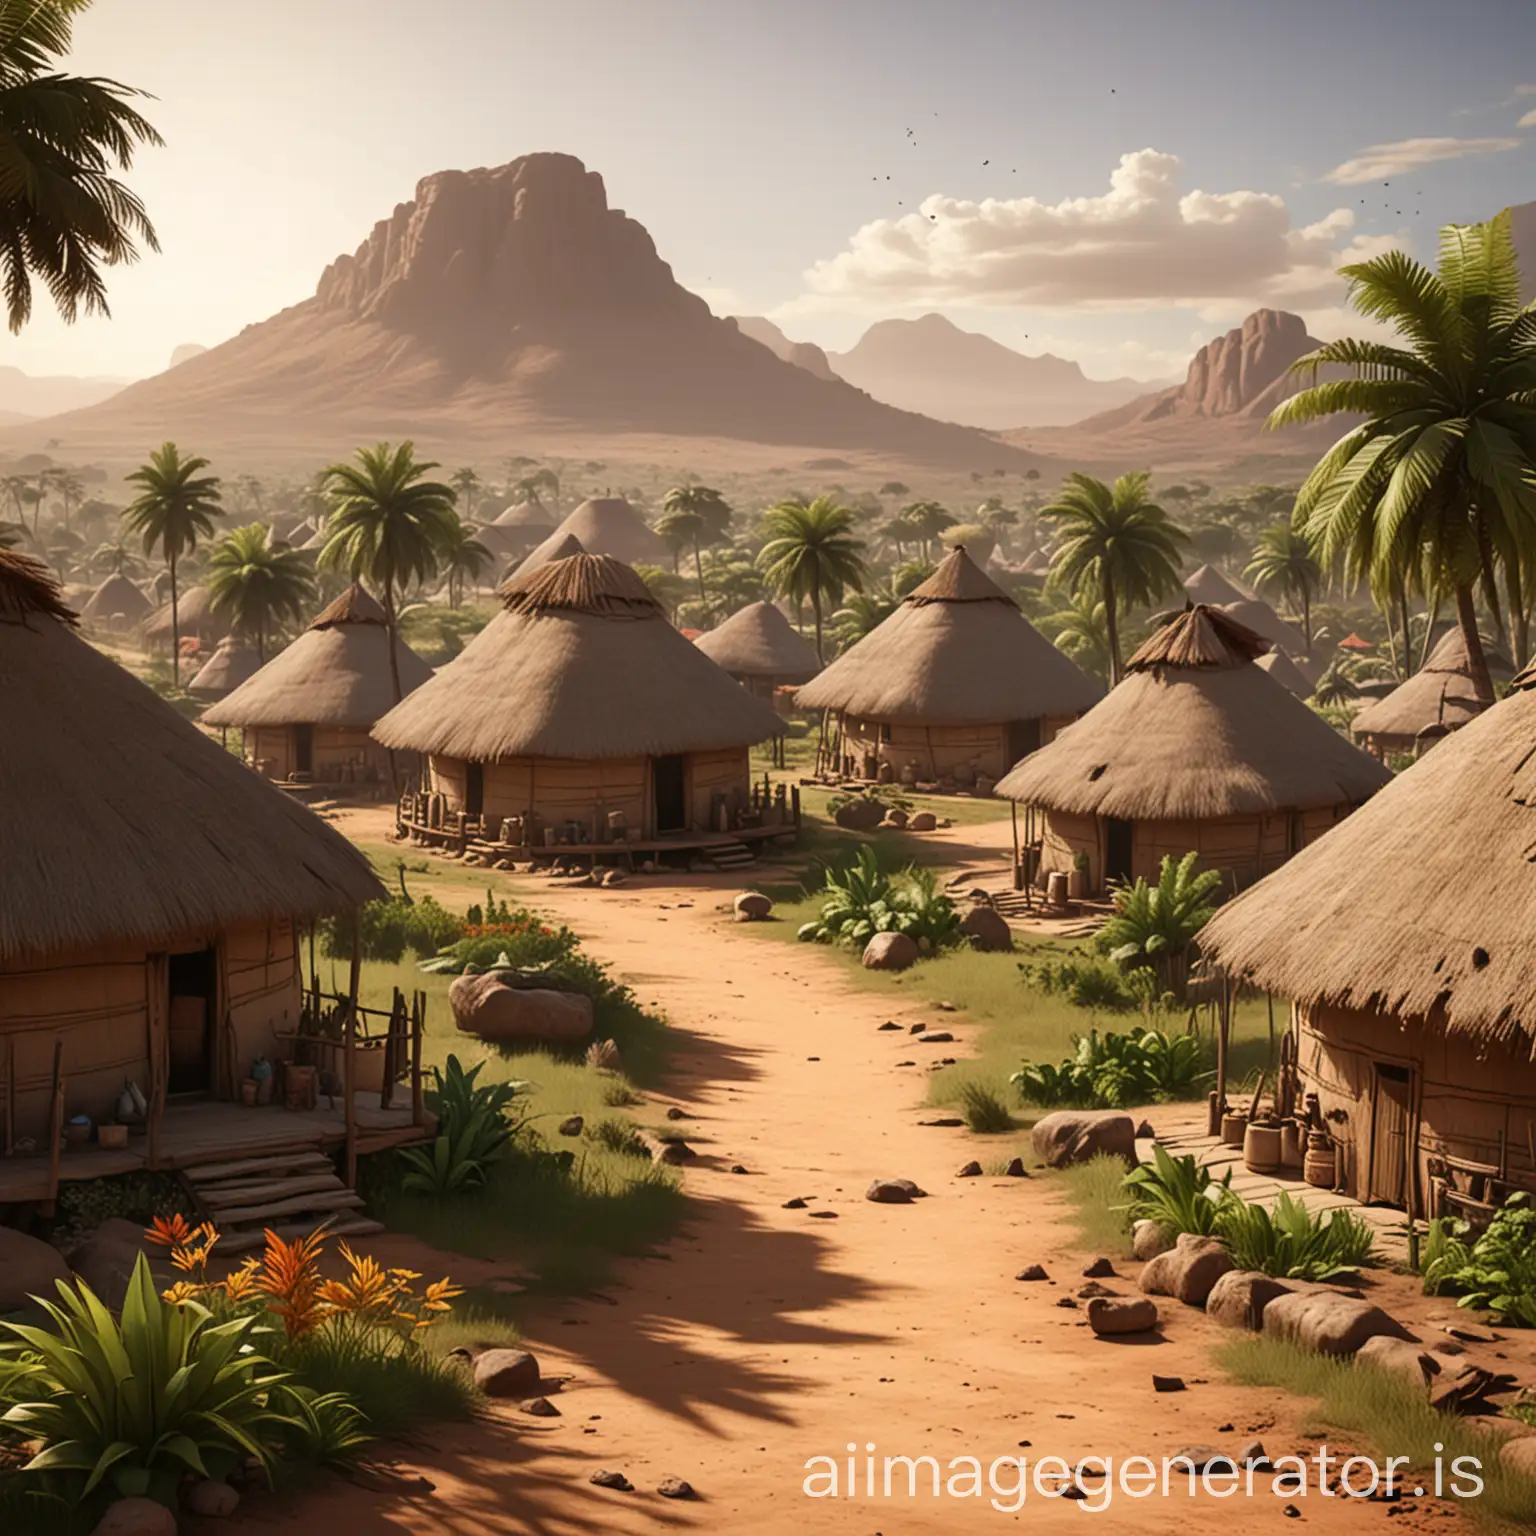 Tranquil-Scene-of-Traditional-African-Village-Amid-Lush-Nature